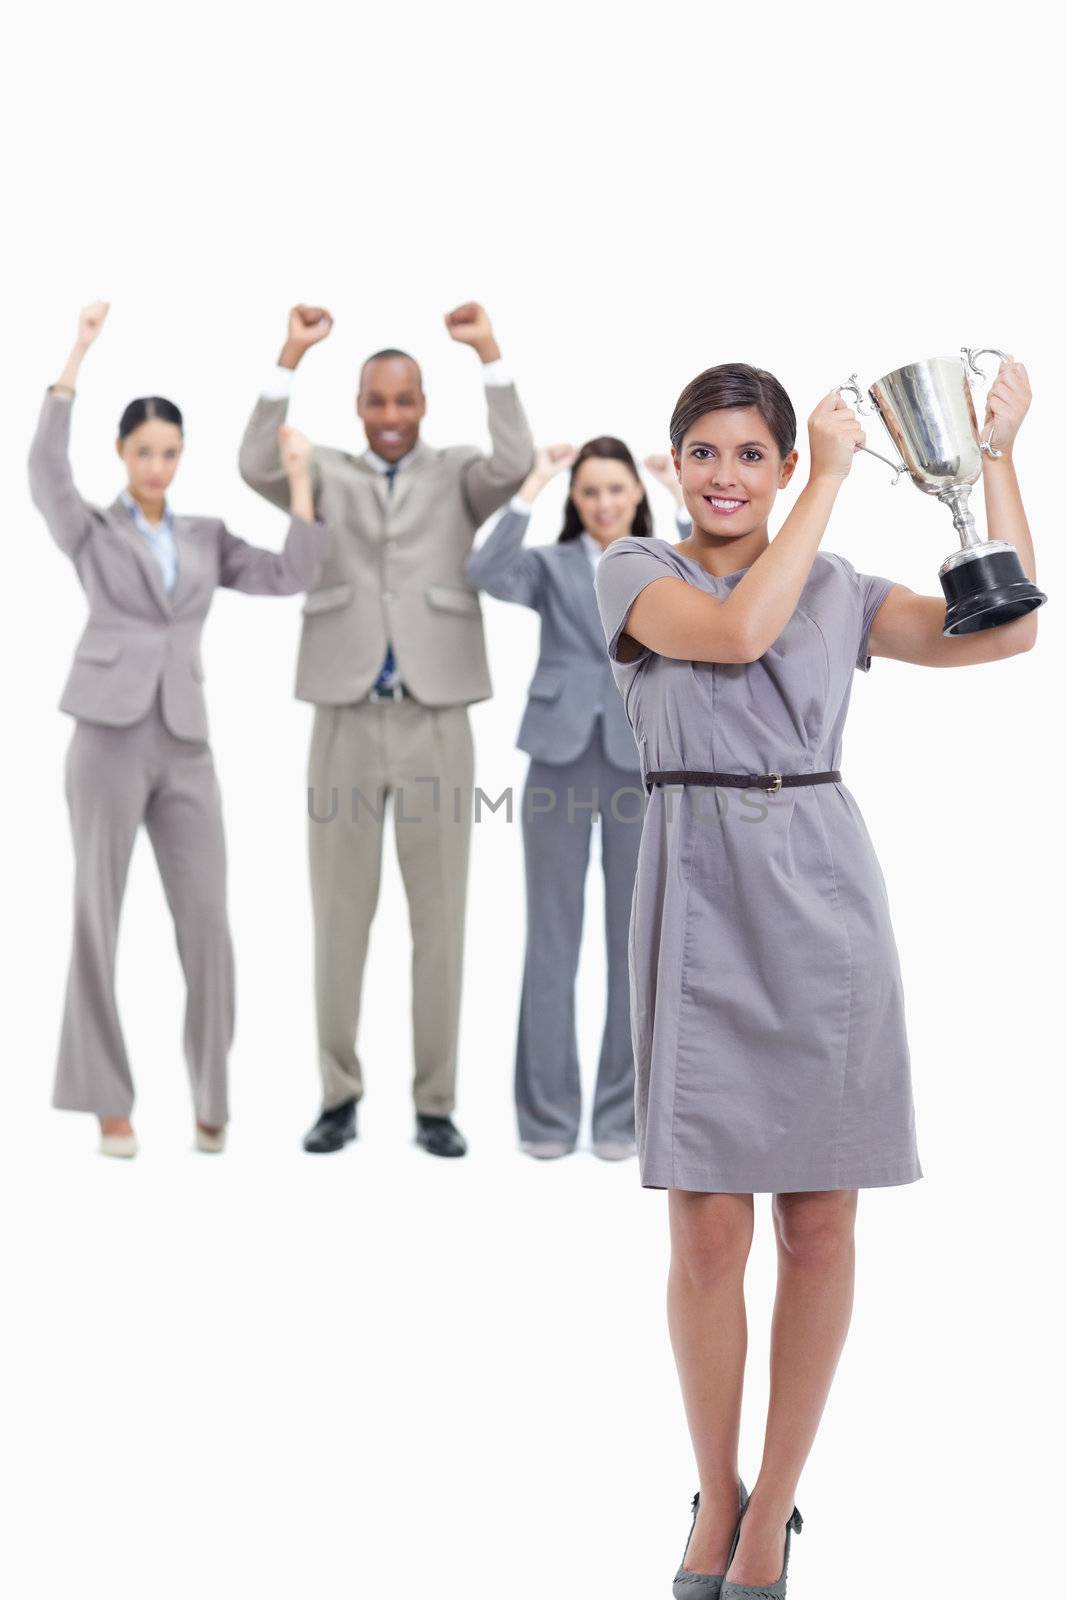 Picture centered on co-workers raising their arms in the background with a woman smiling and holding up a cup 